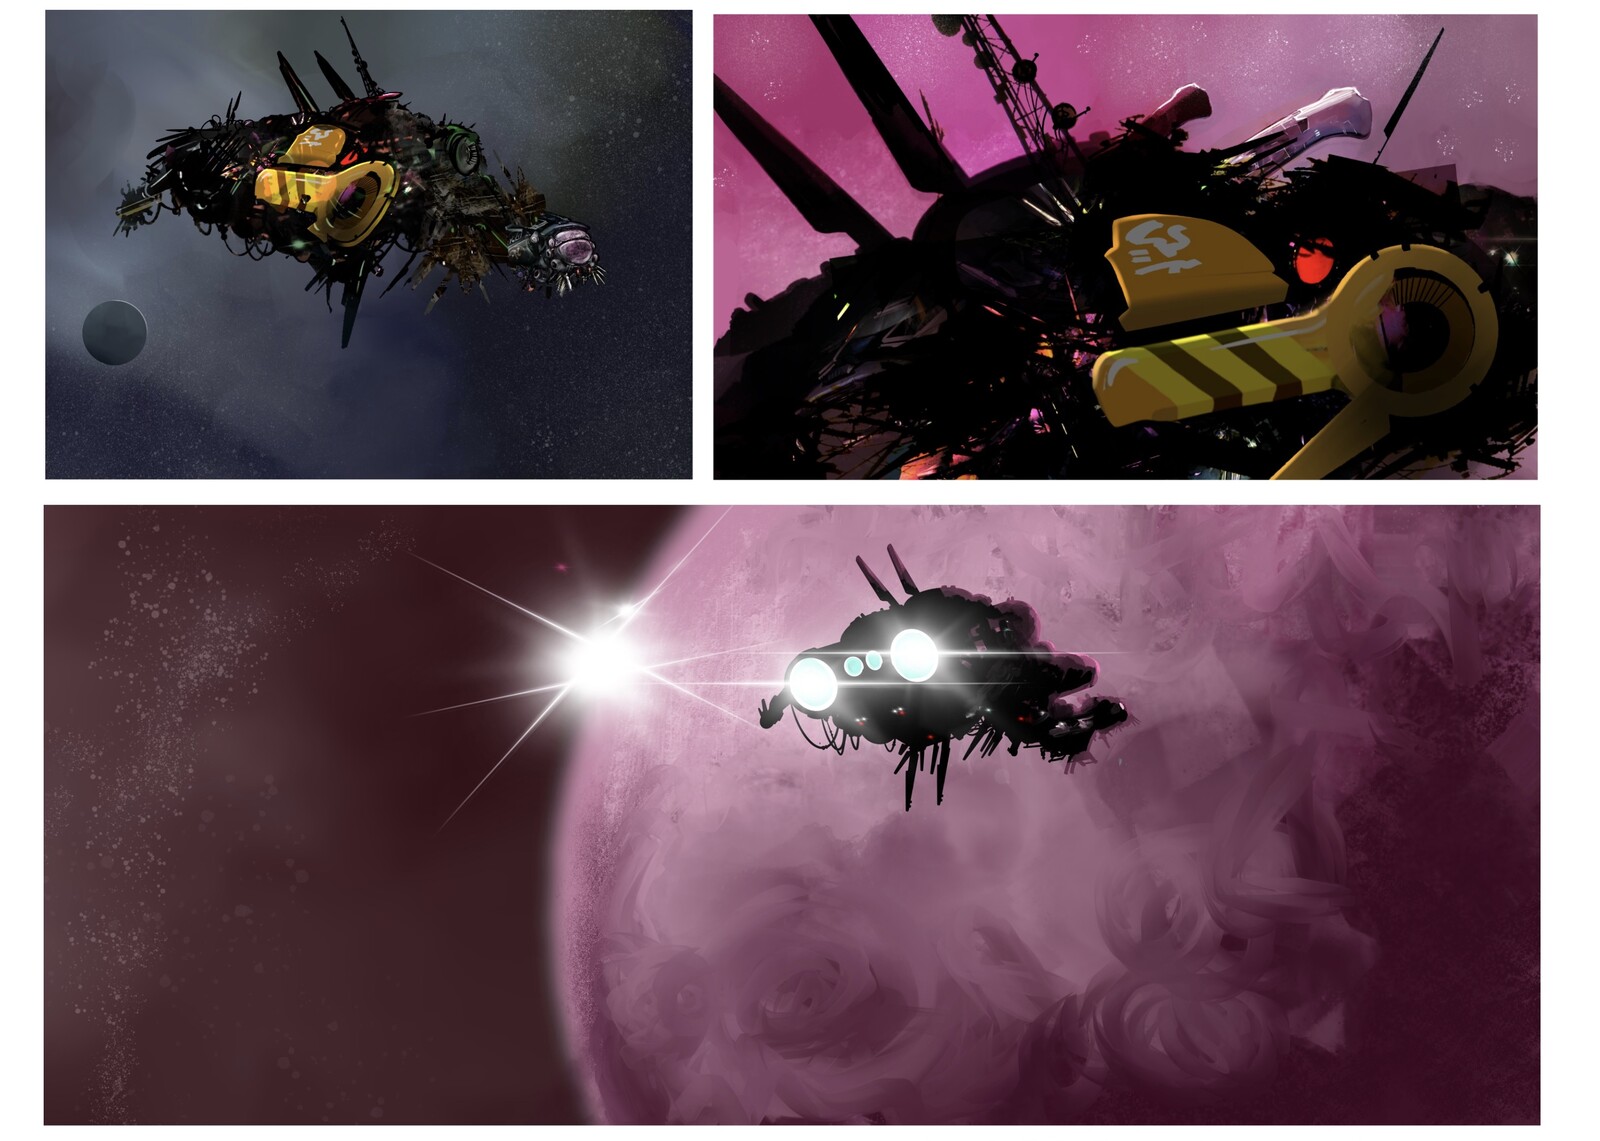 Wide and medium shots of the ship as concept art, later cut up and left on separate layers to facilitate animation.

Ship Designs based on early thumbnails by Andrew Segal.